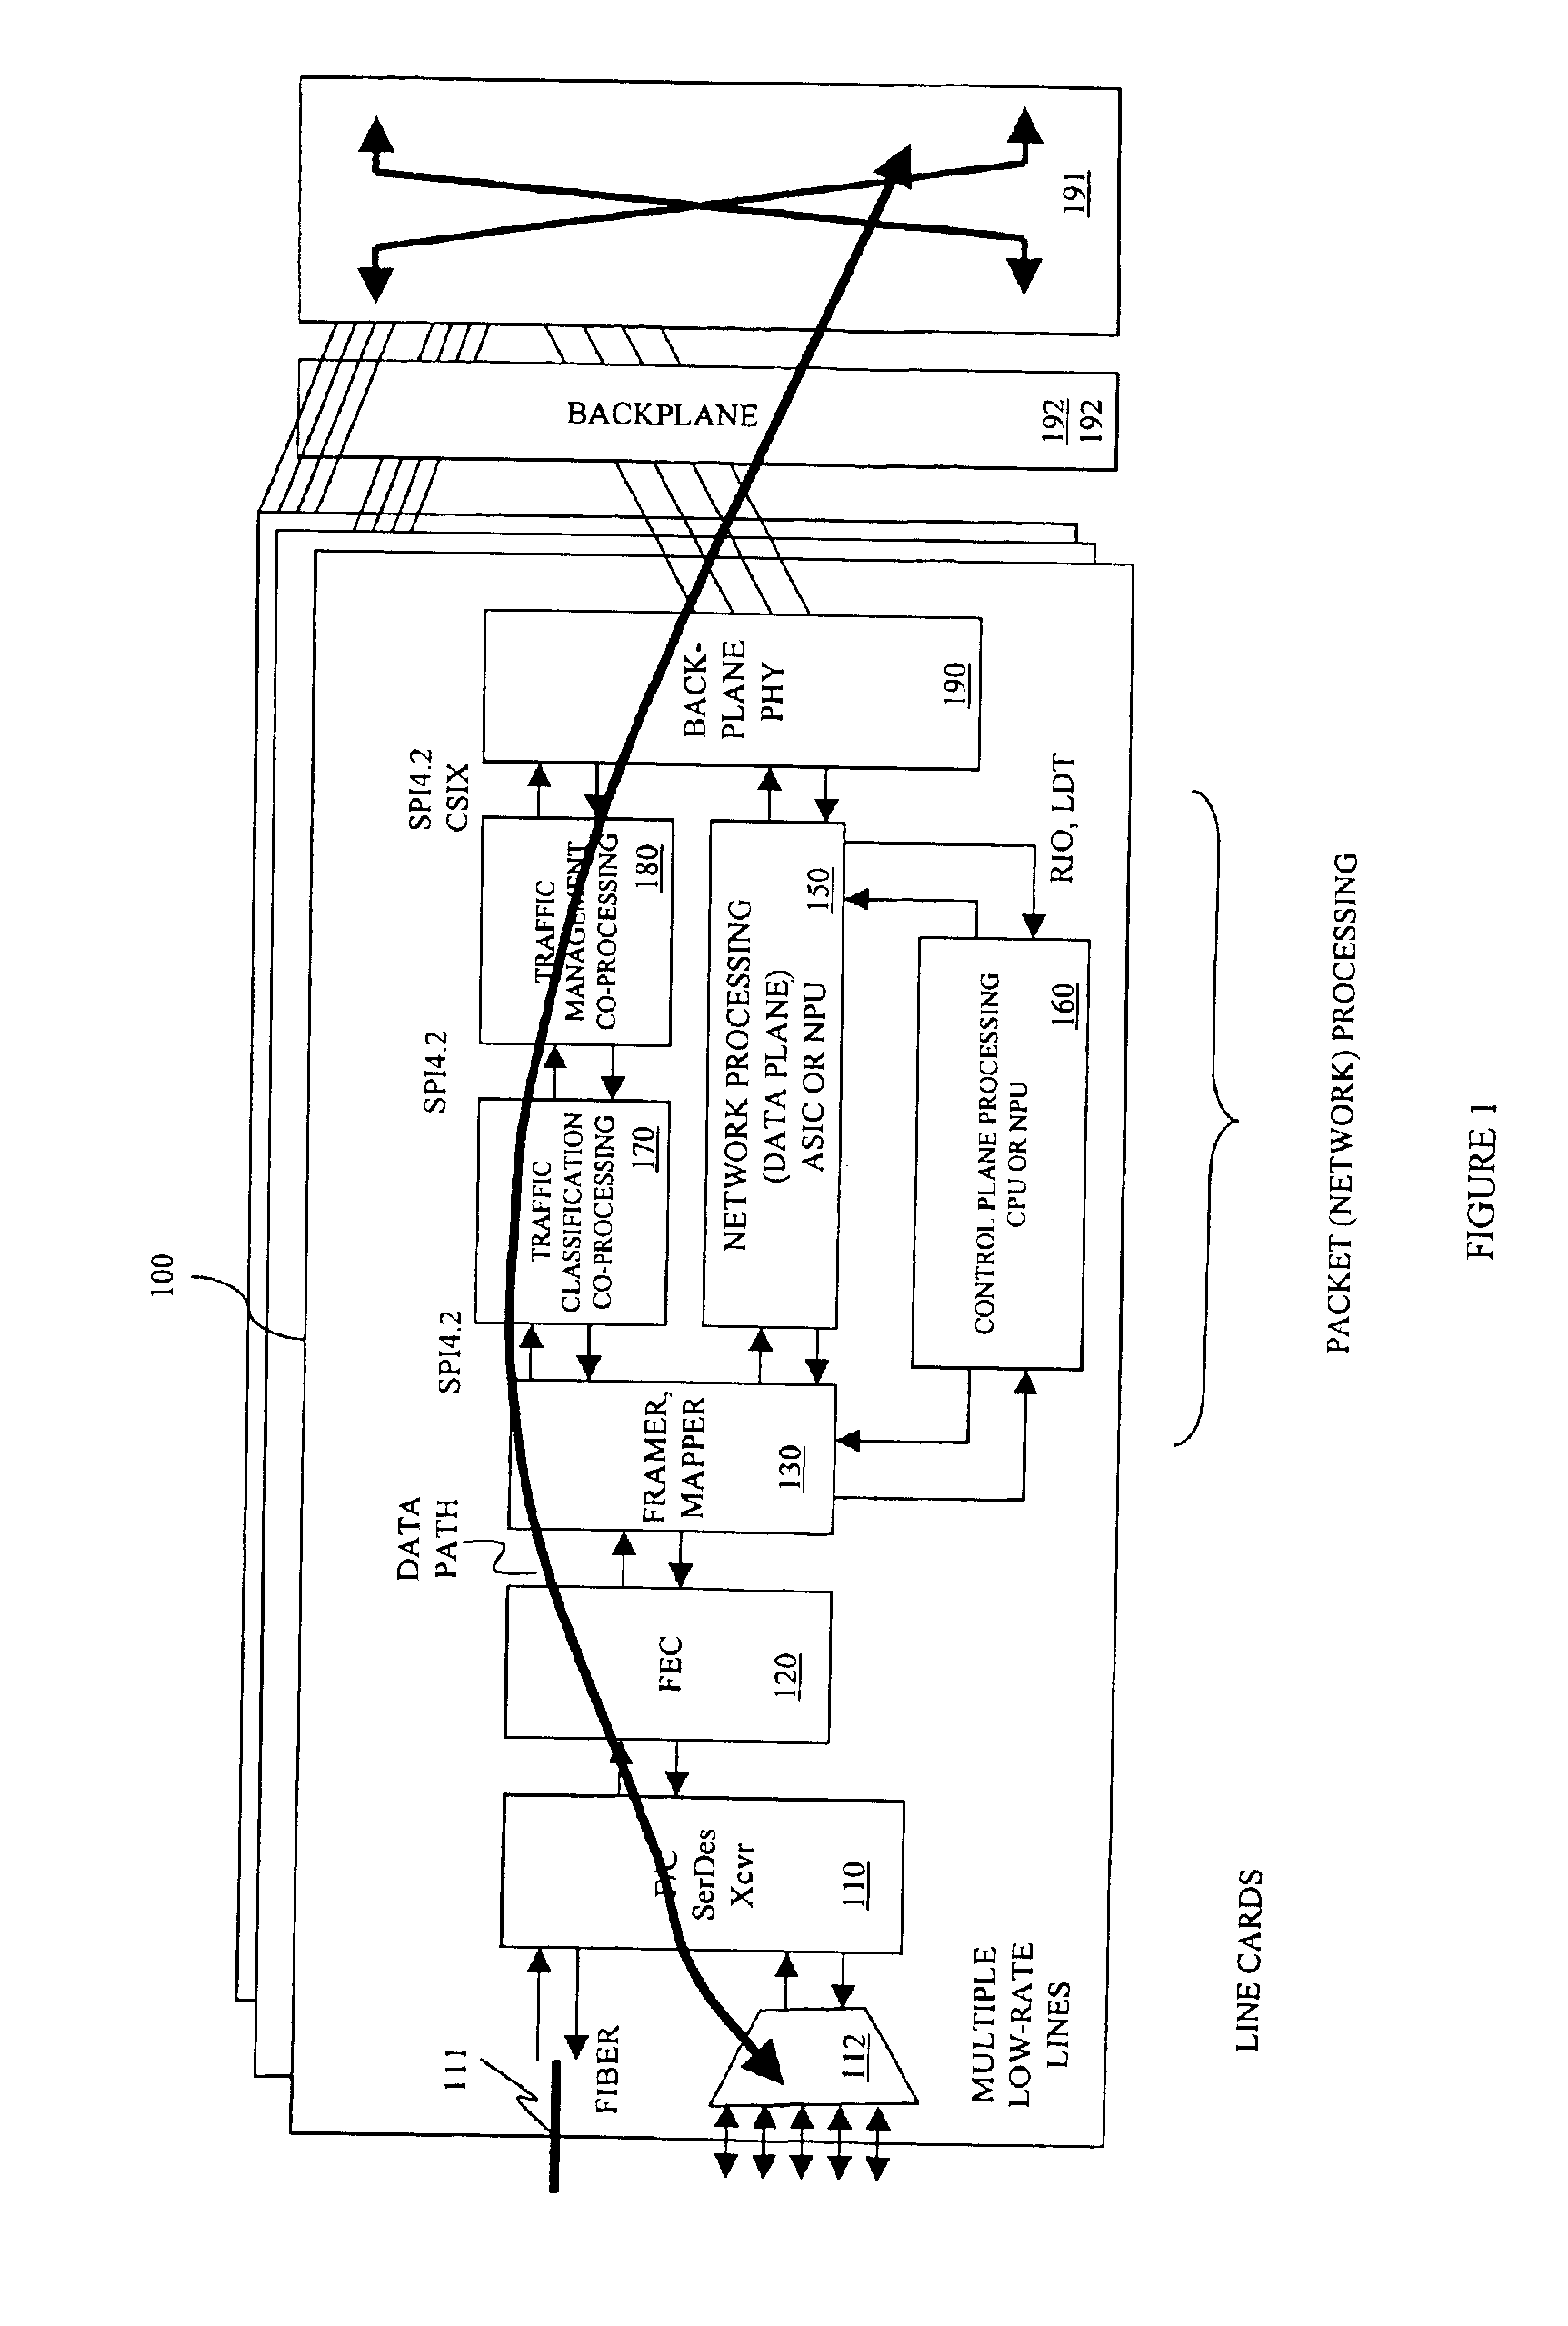 Integrated circuit having integrated programmable gate array and field programmable gate array, and method of operating the same